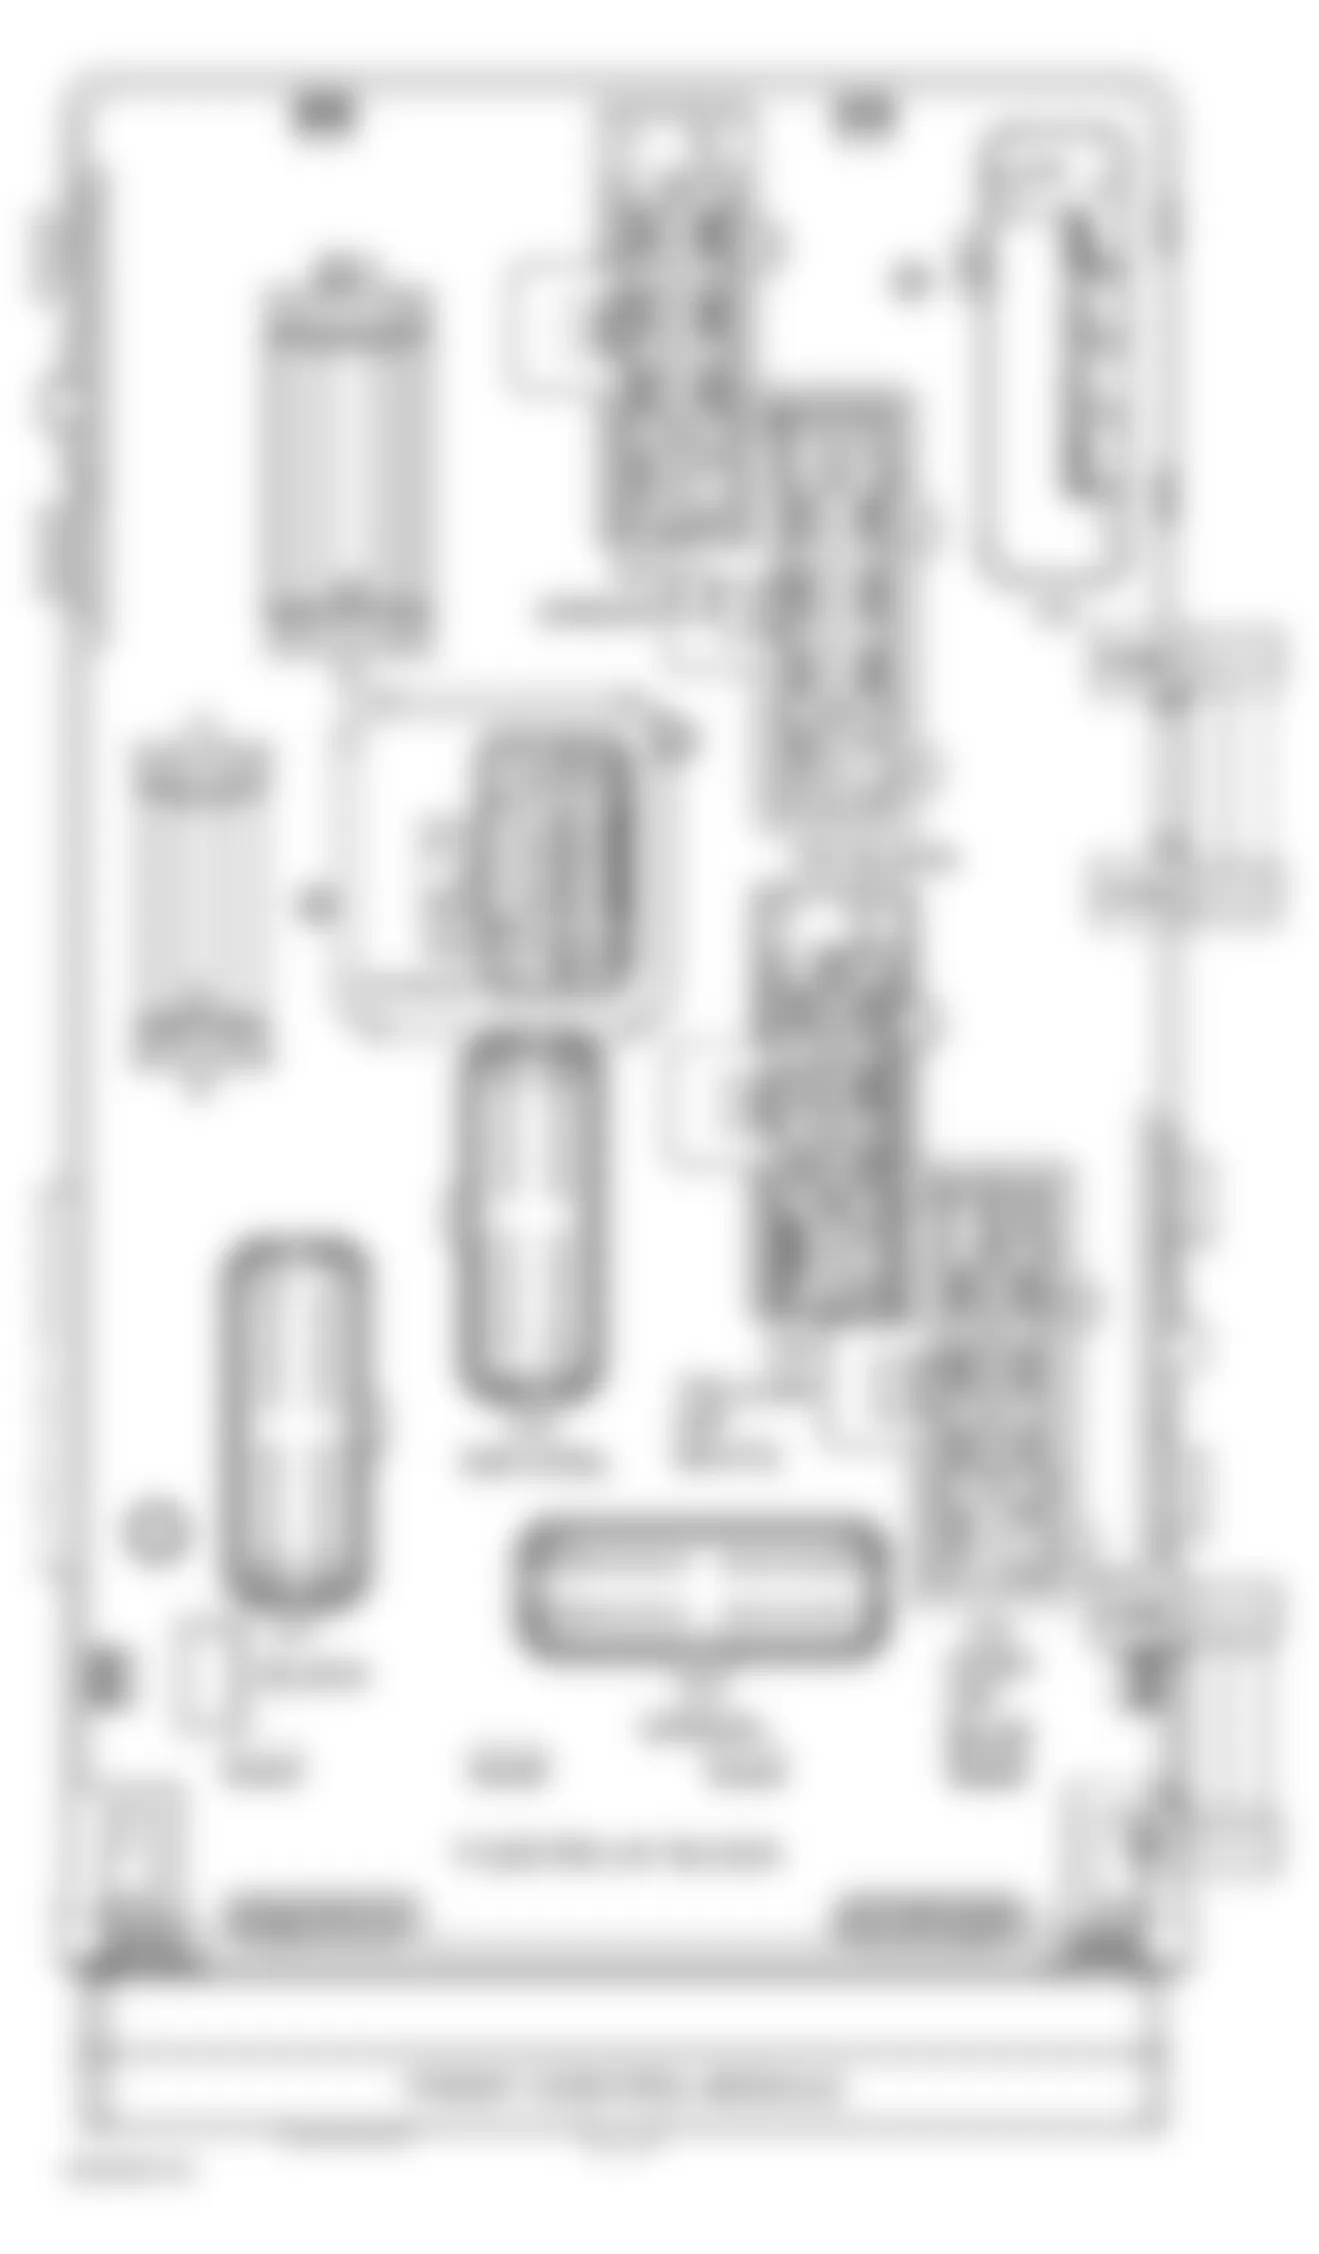 Chrysler Town & Country LX 2001 - Component Locations -  Identifying Fuse & Relay Center (2 Of 2)